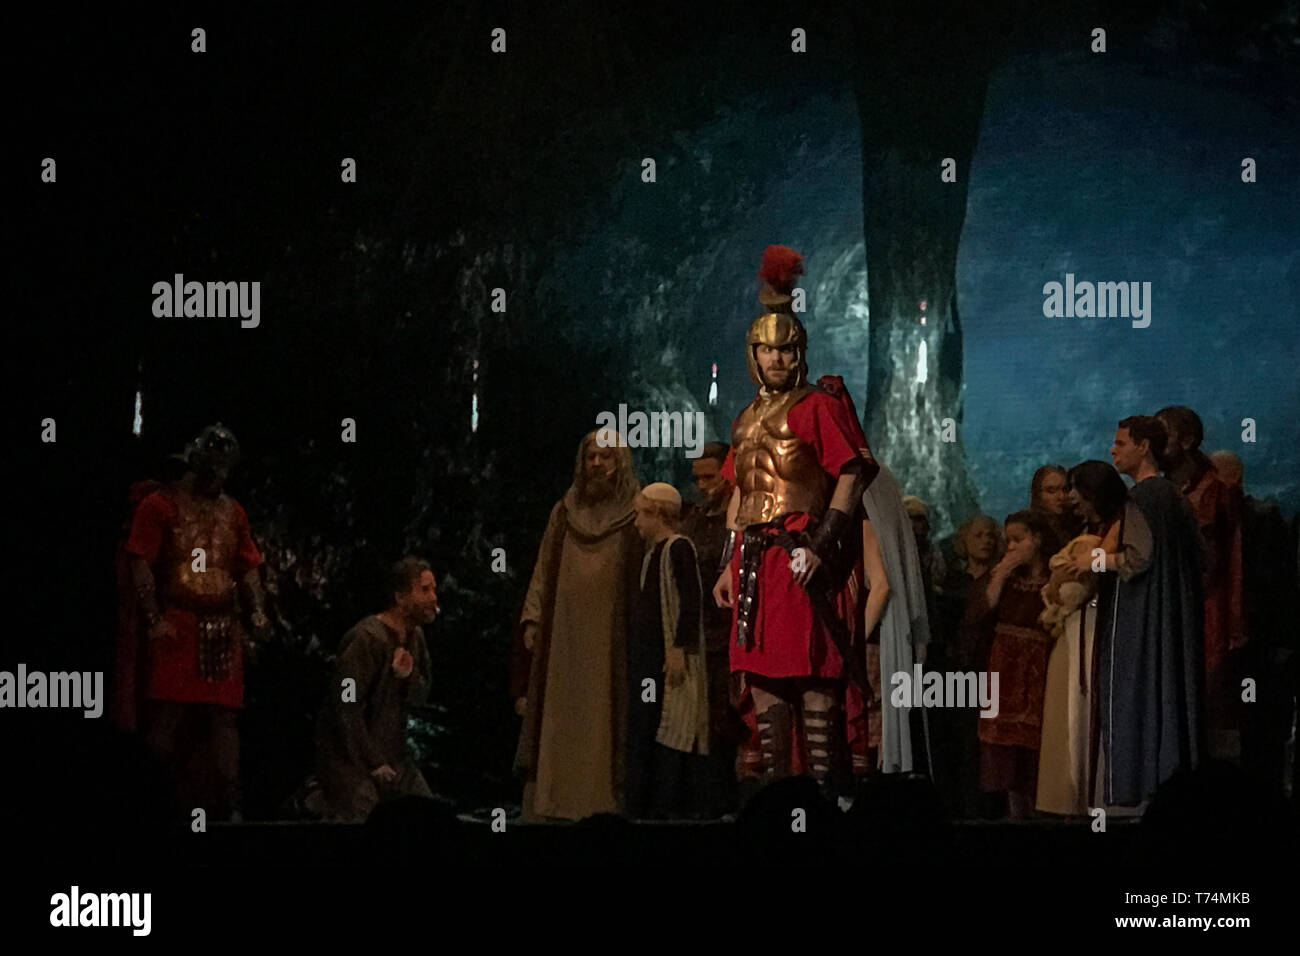 Orlando, Florida, USA. 3rd May, 2019. Actors perform ''The Empire and the Kingdom'' (part one) in the Church of All Nations in The Holy Land Experience (HLE) in Orlando, Florida. The theme park, owned by the Trinity Broadcasting Network, recreates the architecture and themes of the ancient city of Jerusalem in 1st-century Judea. HLE is a non-denominational Christian living biblical museum and church. The park opened in February 2001. There are multiple live performances given throughout various locations each the day. Credit: Tracy Barbutes/ZUMA Wire/Alamy Live News Stock Photo